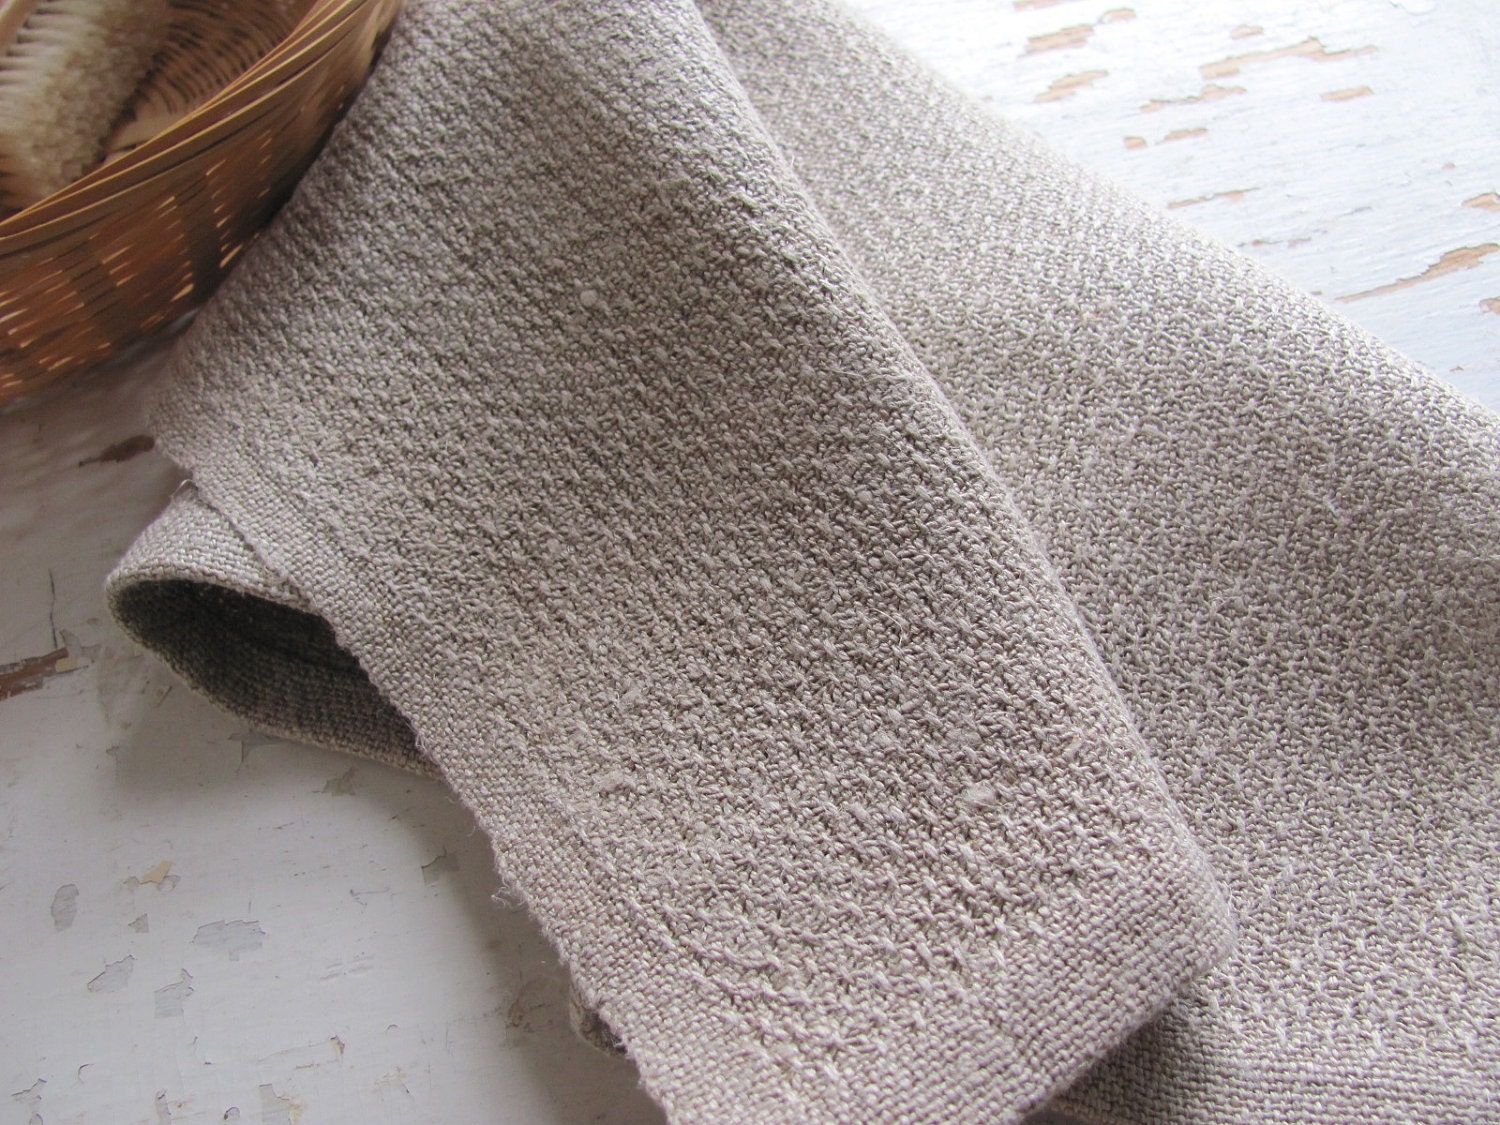 Natural Rustic Linen Handwoven Hand or Bath Towel with Textured Huck Pattern Weave